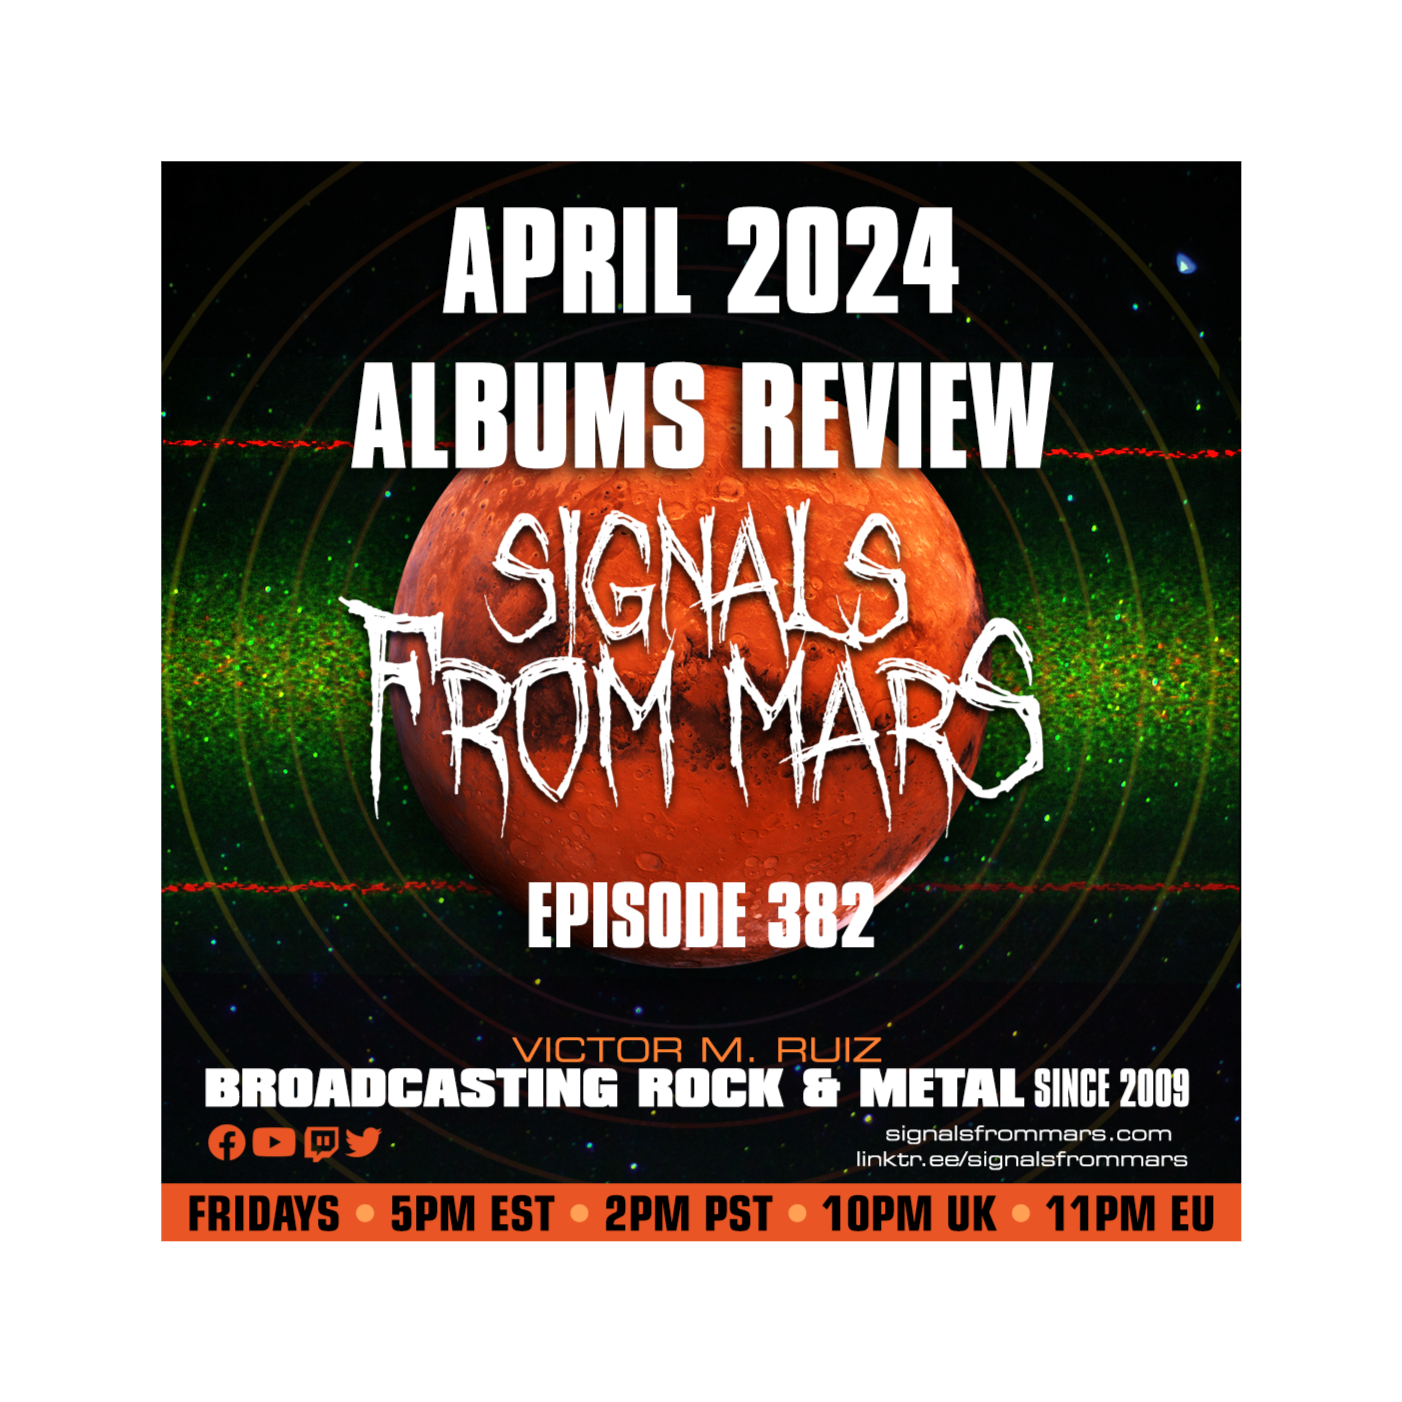 Signals From Mars - Episode 382 - April 2024 Albums Countdown